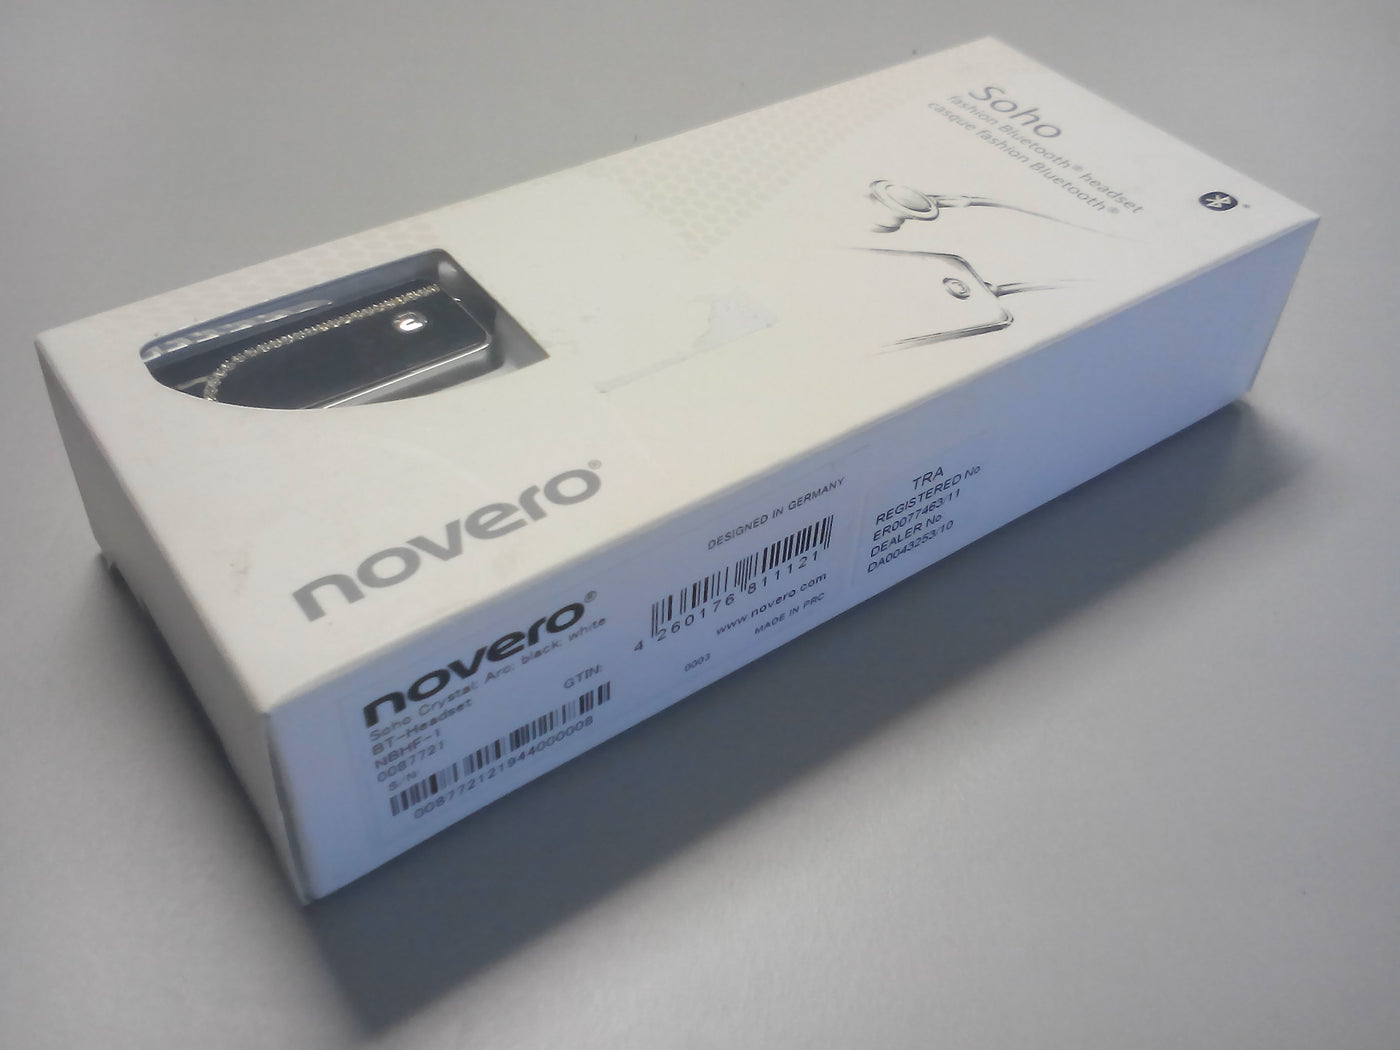 Novero Soho Crystal Arc Bluetooth Headset - Black / White - PC User | PC Parts And Spares | FREE UK DELIVERY